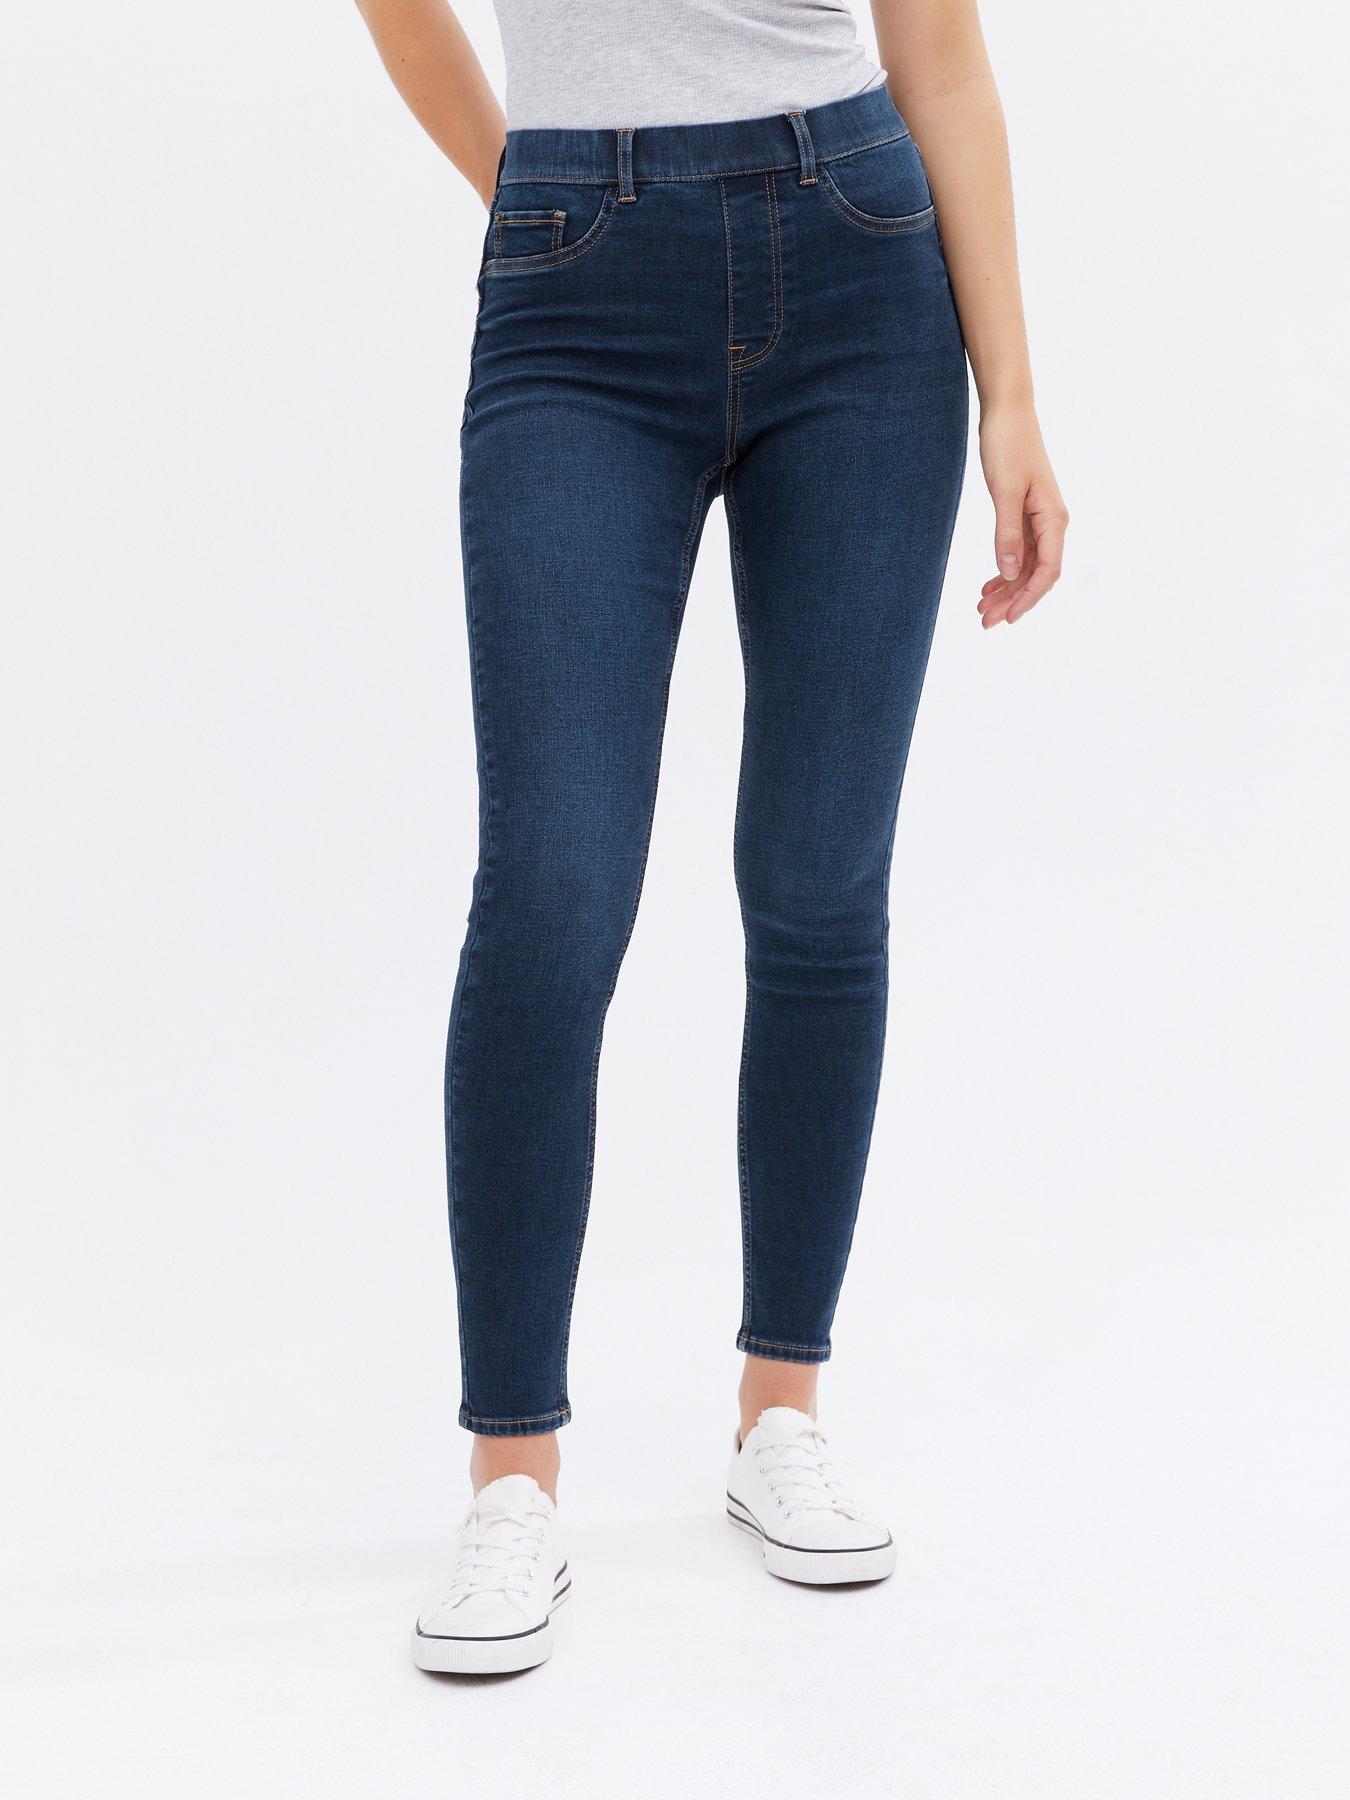 New Look lift & shape jegging in blue